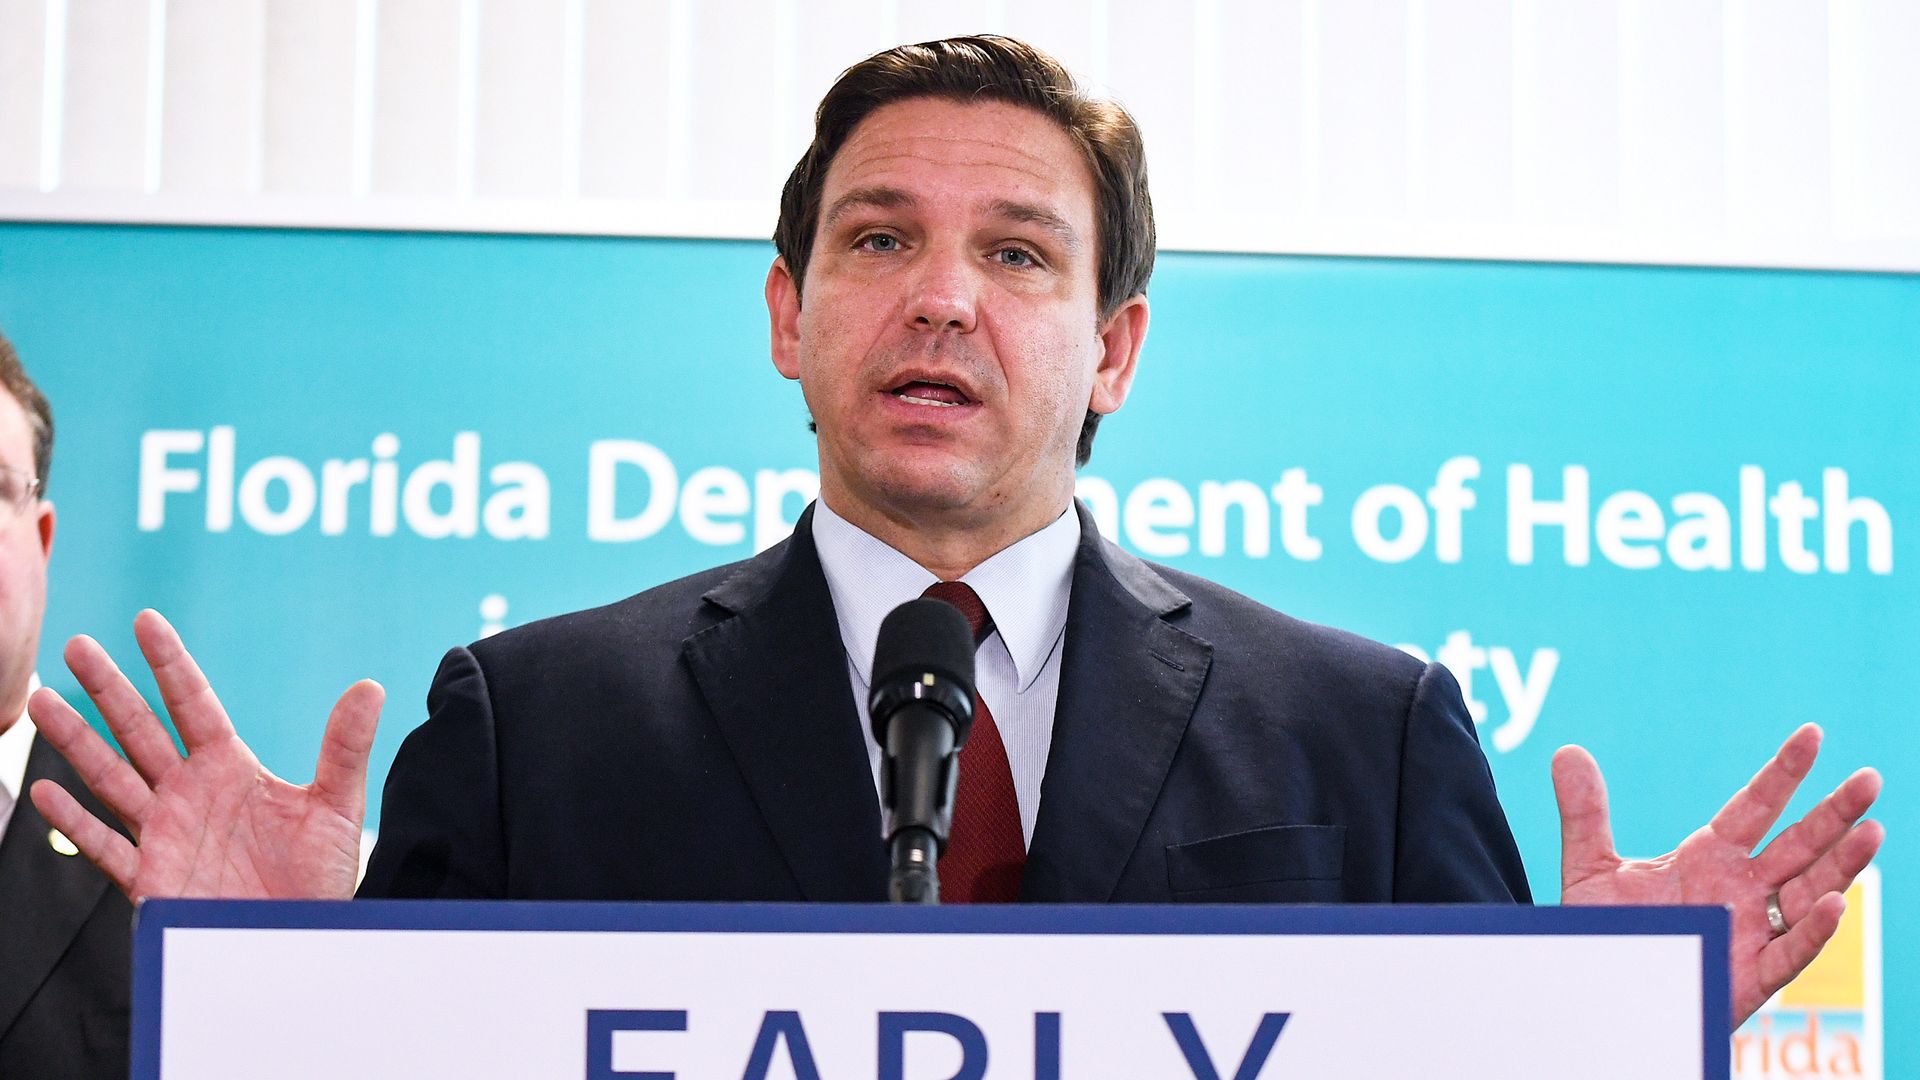  Florida Gov. Ron DeSantis holds a news conference at the Florida Department of Health office in Viera, Florida.